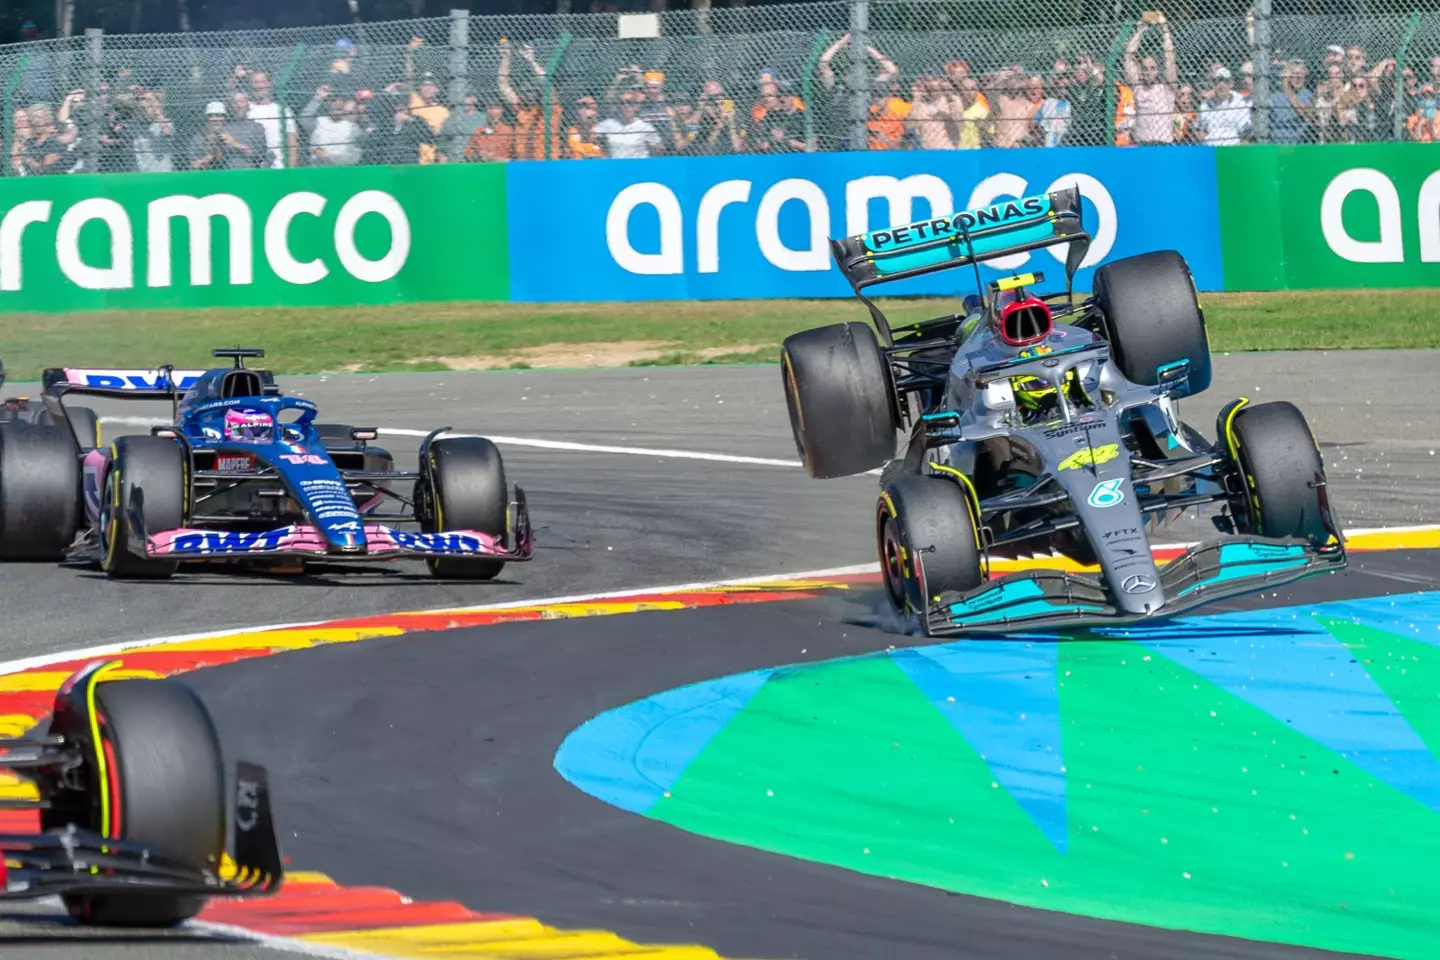 Hamilton got thrown into the air during the collision. Image: Alamy